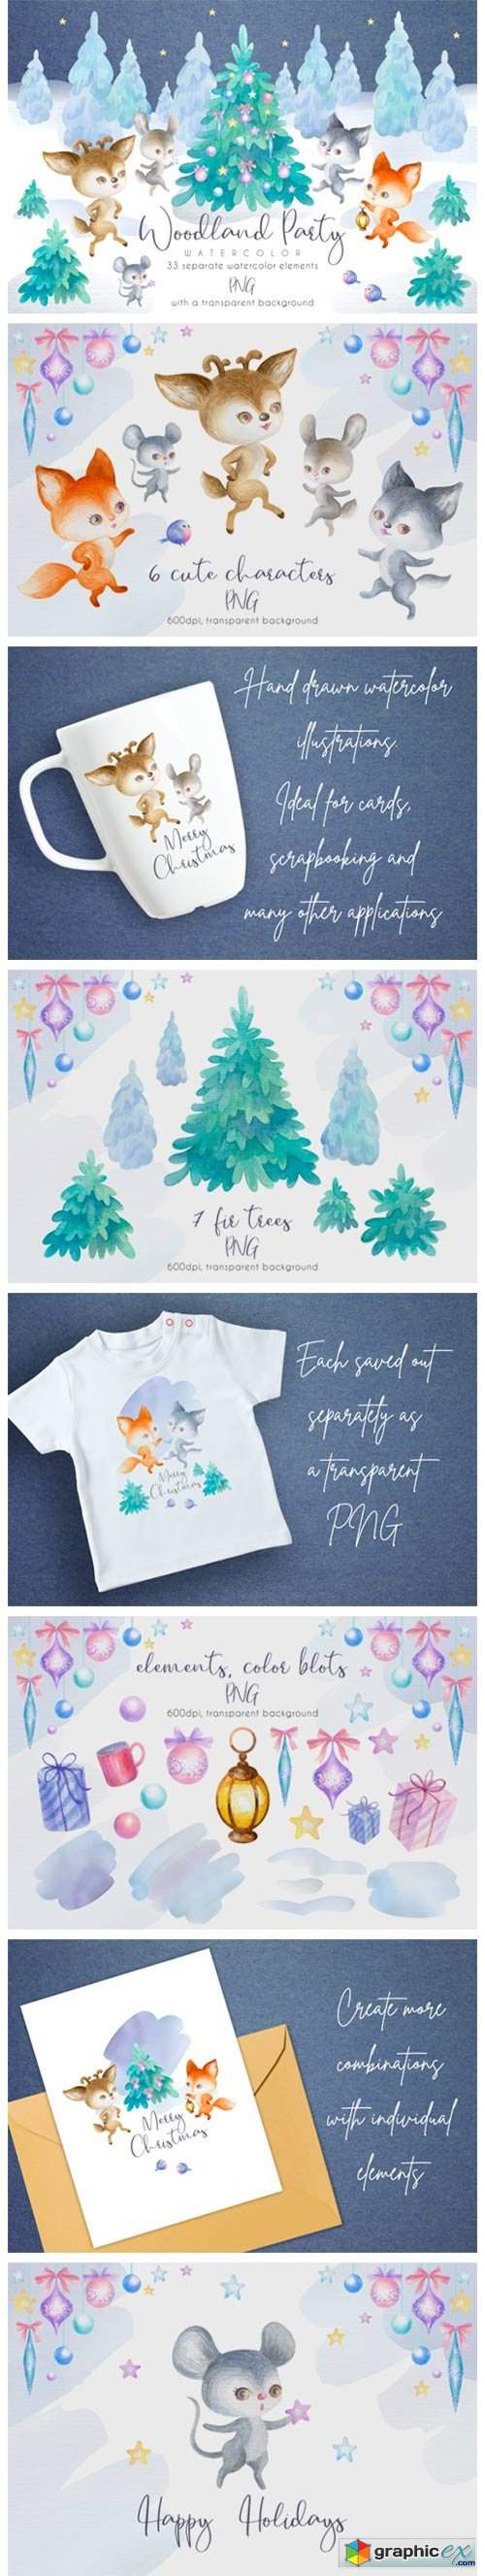 Woodland Party. Watercolor Christmas Set